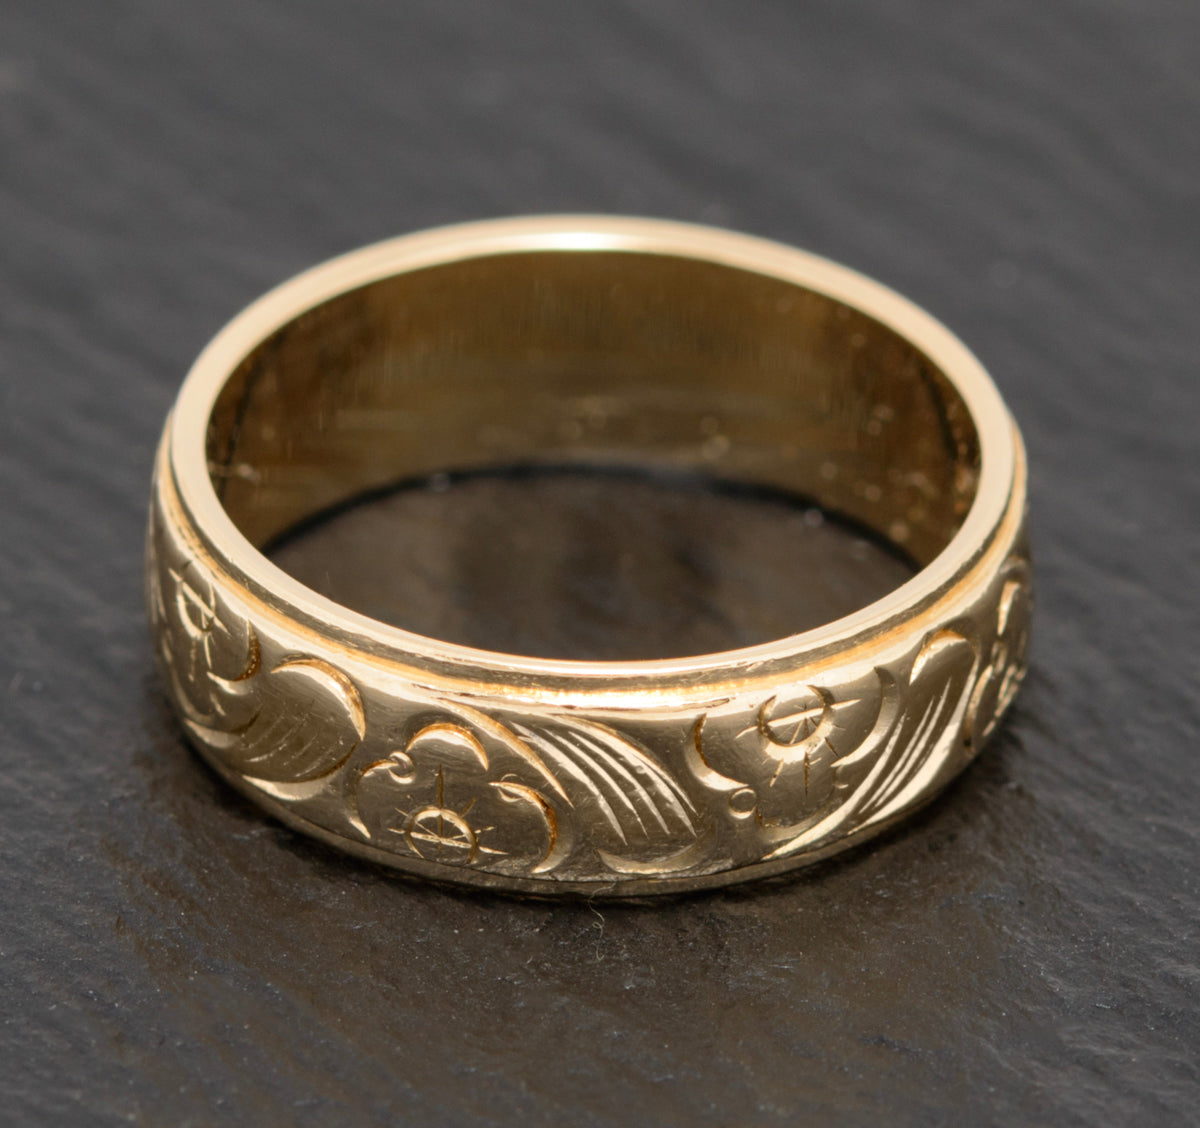 Vintage 14K 14ct Solid Gold Wedding Ring Band With Engraved Floral Design (A1583)